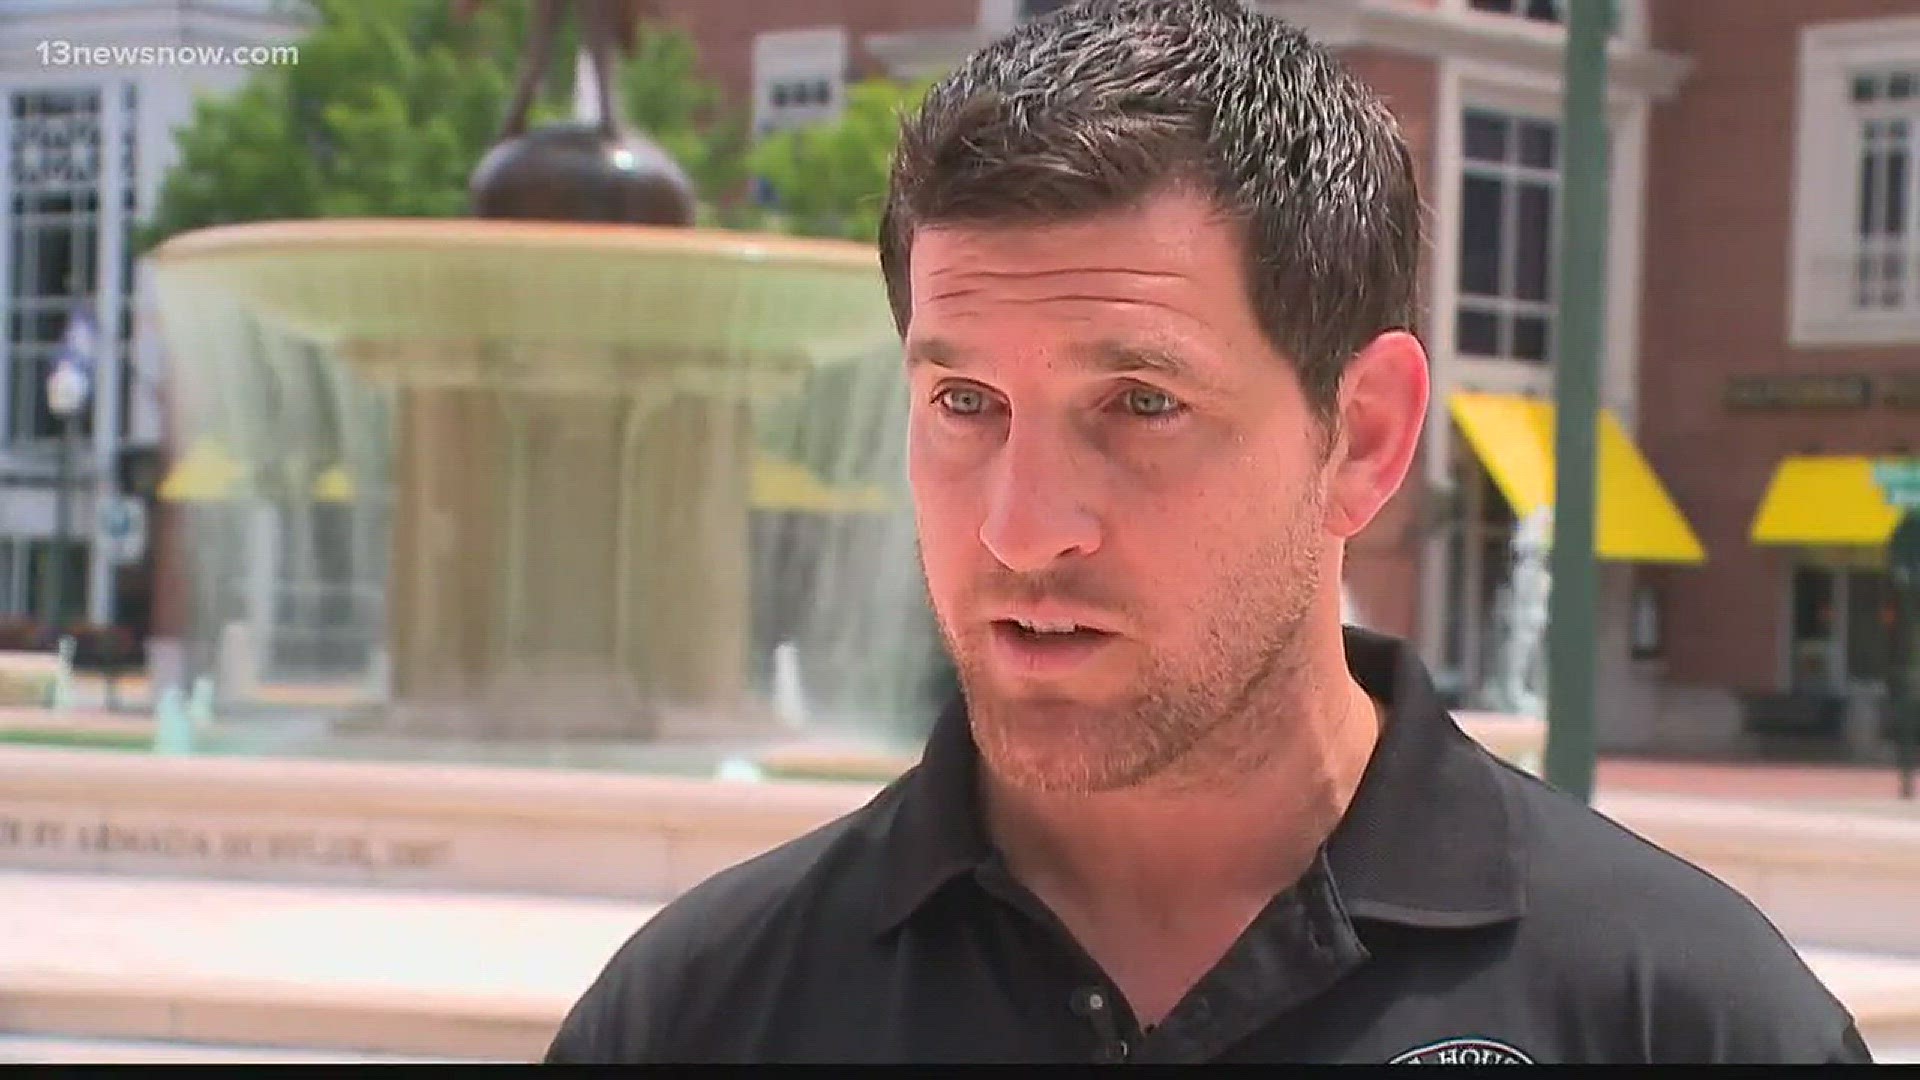 Wallace Godwin was apparently upset with Congressman Scott Taylor over marijuana policy and allegedly threatened to assault and murder him. 13News Now Meghan Puryear has the latest developments.